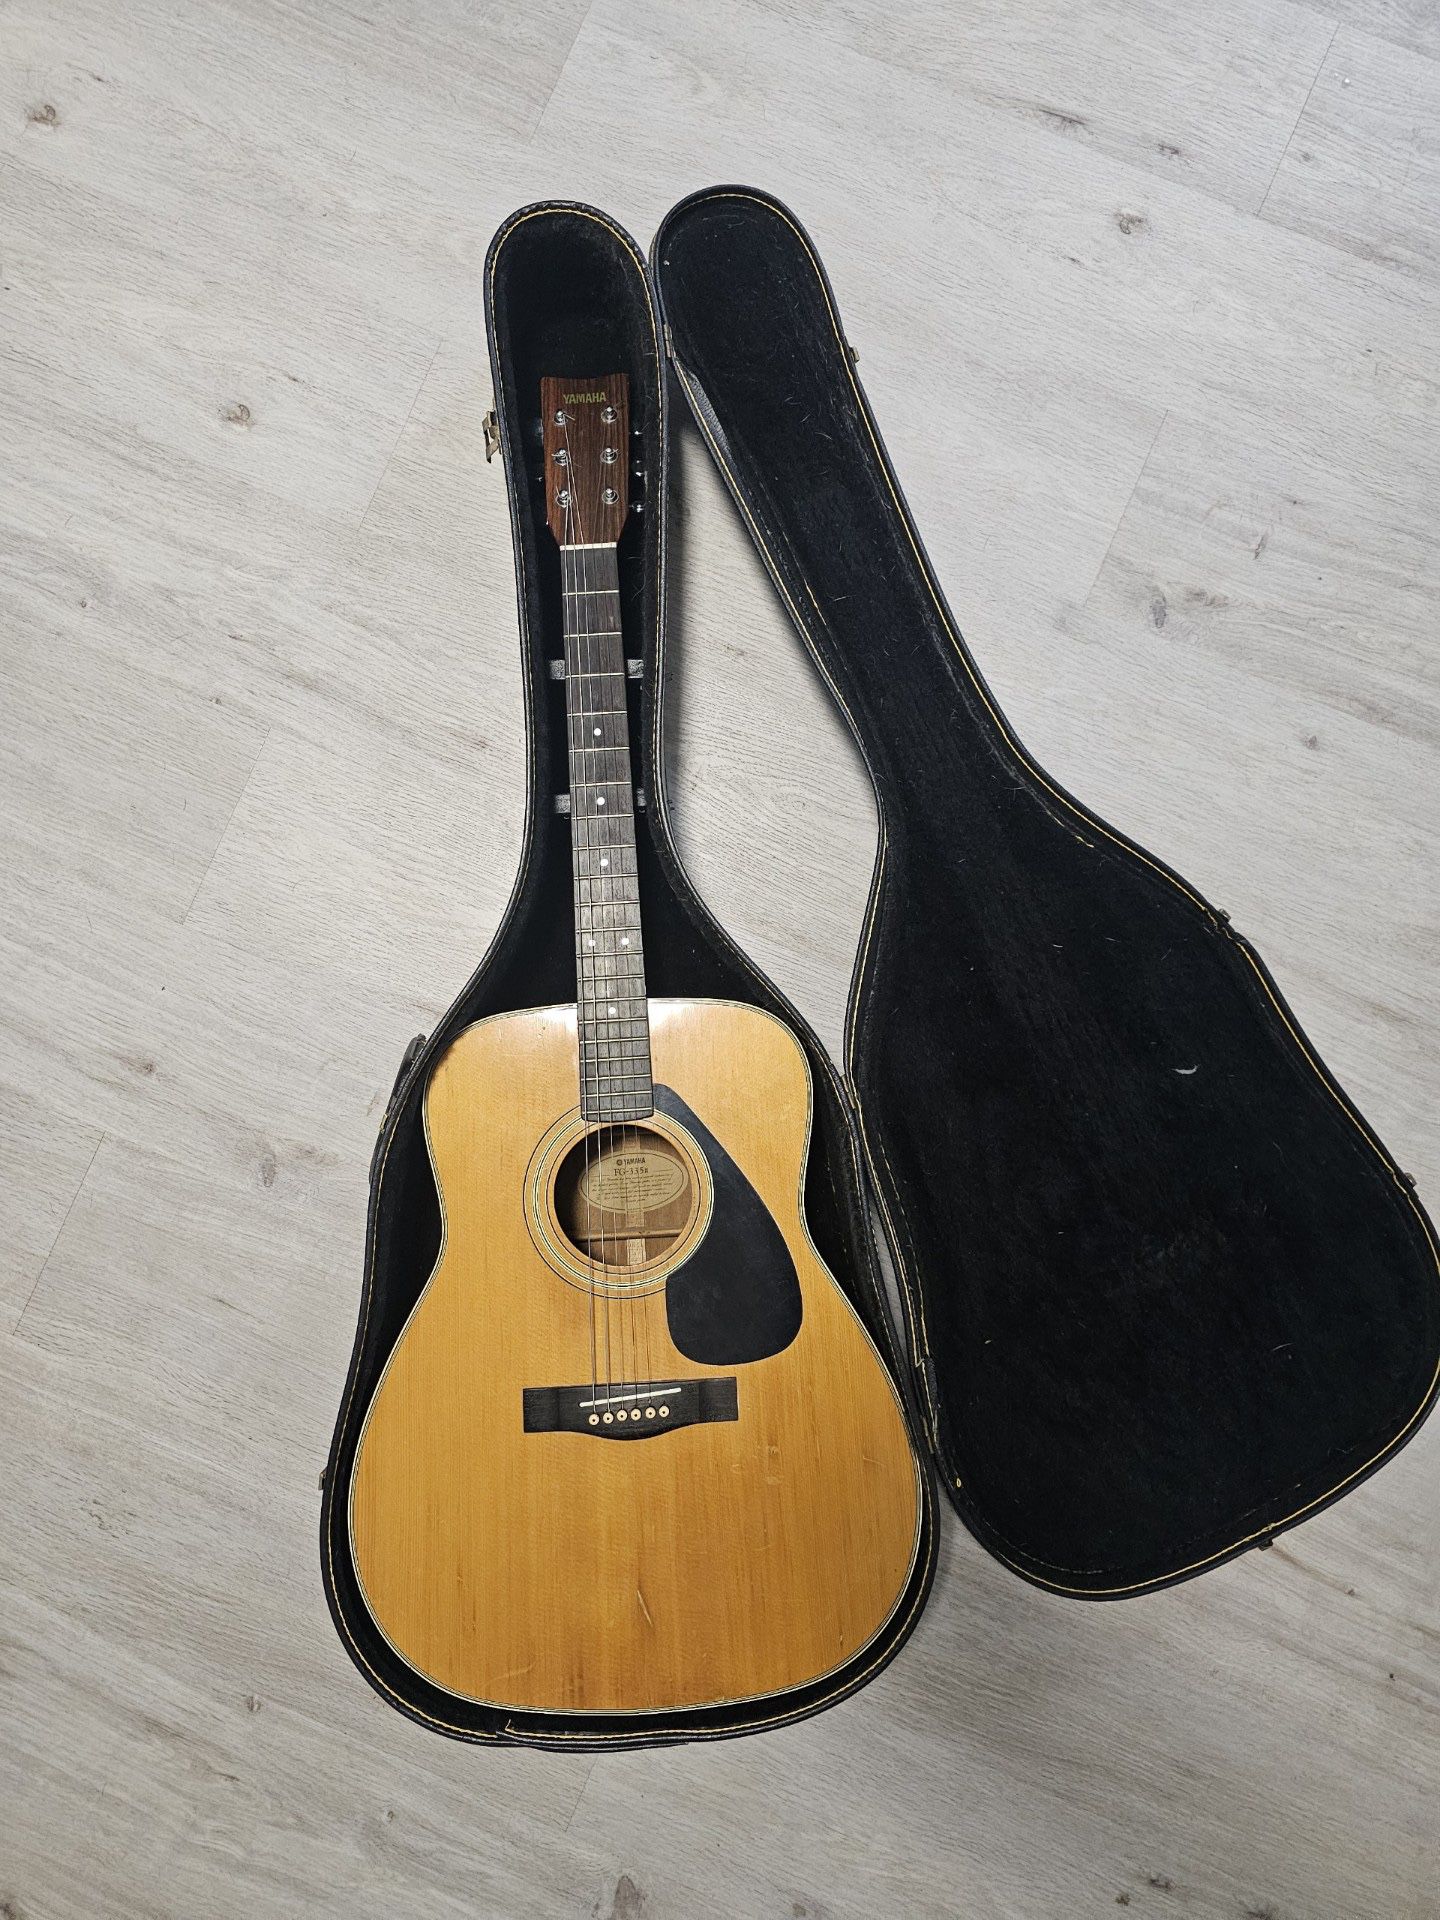 Yamaha FG-335ii Acoustic Guitar with Case FG335 II FG 335 Dreadnought Vintage 2 two